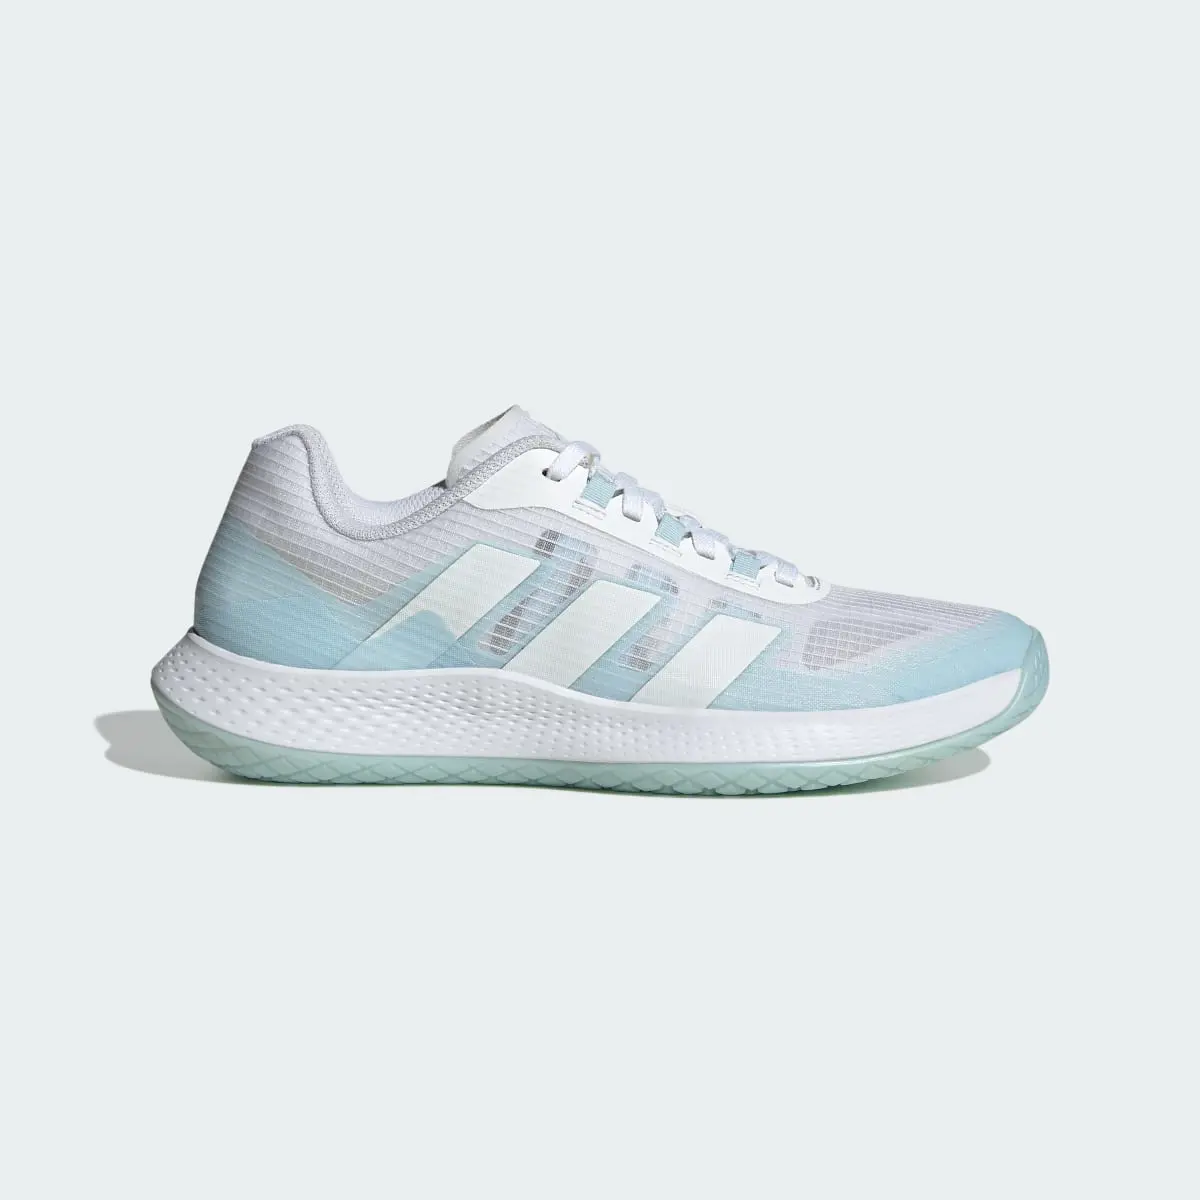 Adidas Forcebounce Volleyball Schuh. 2